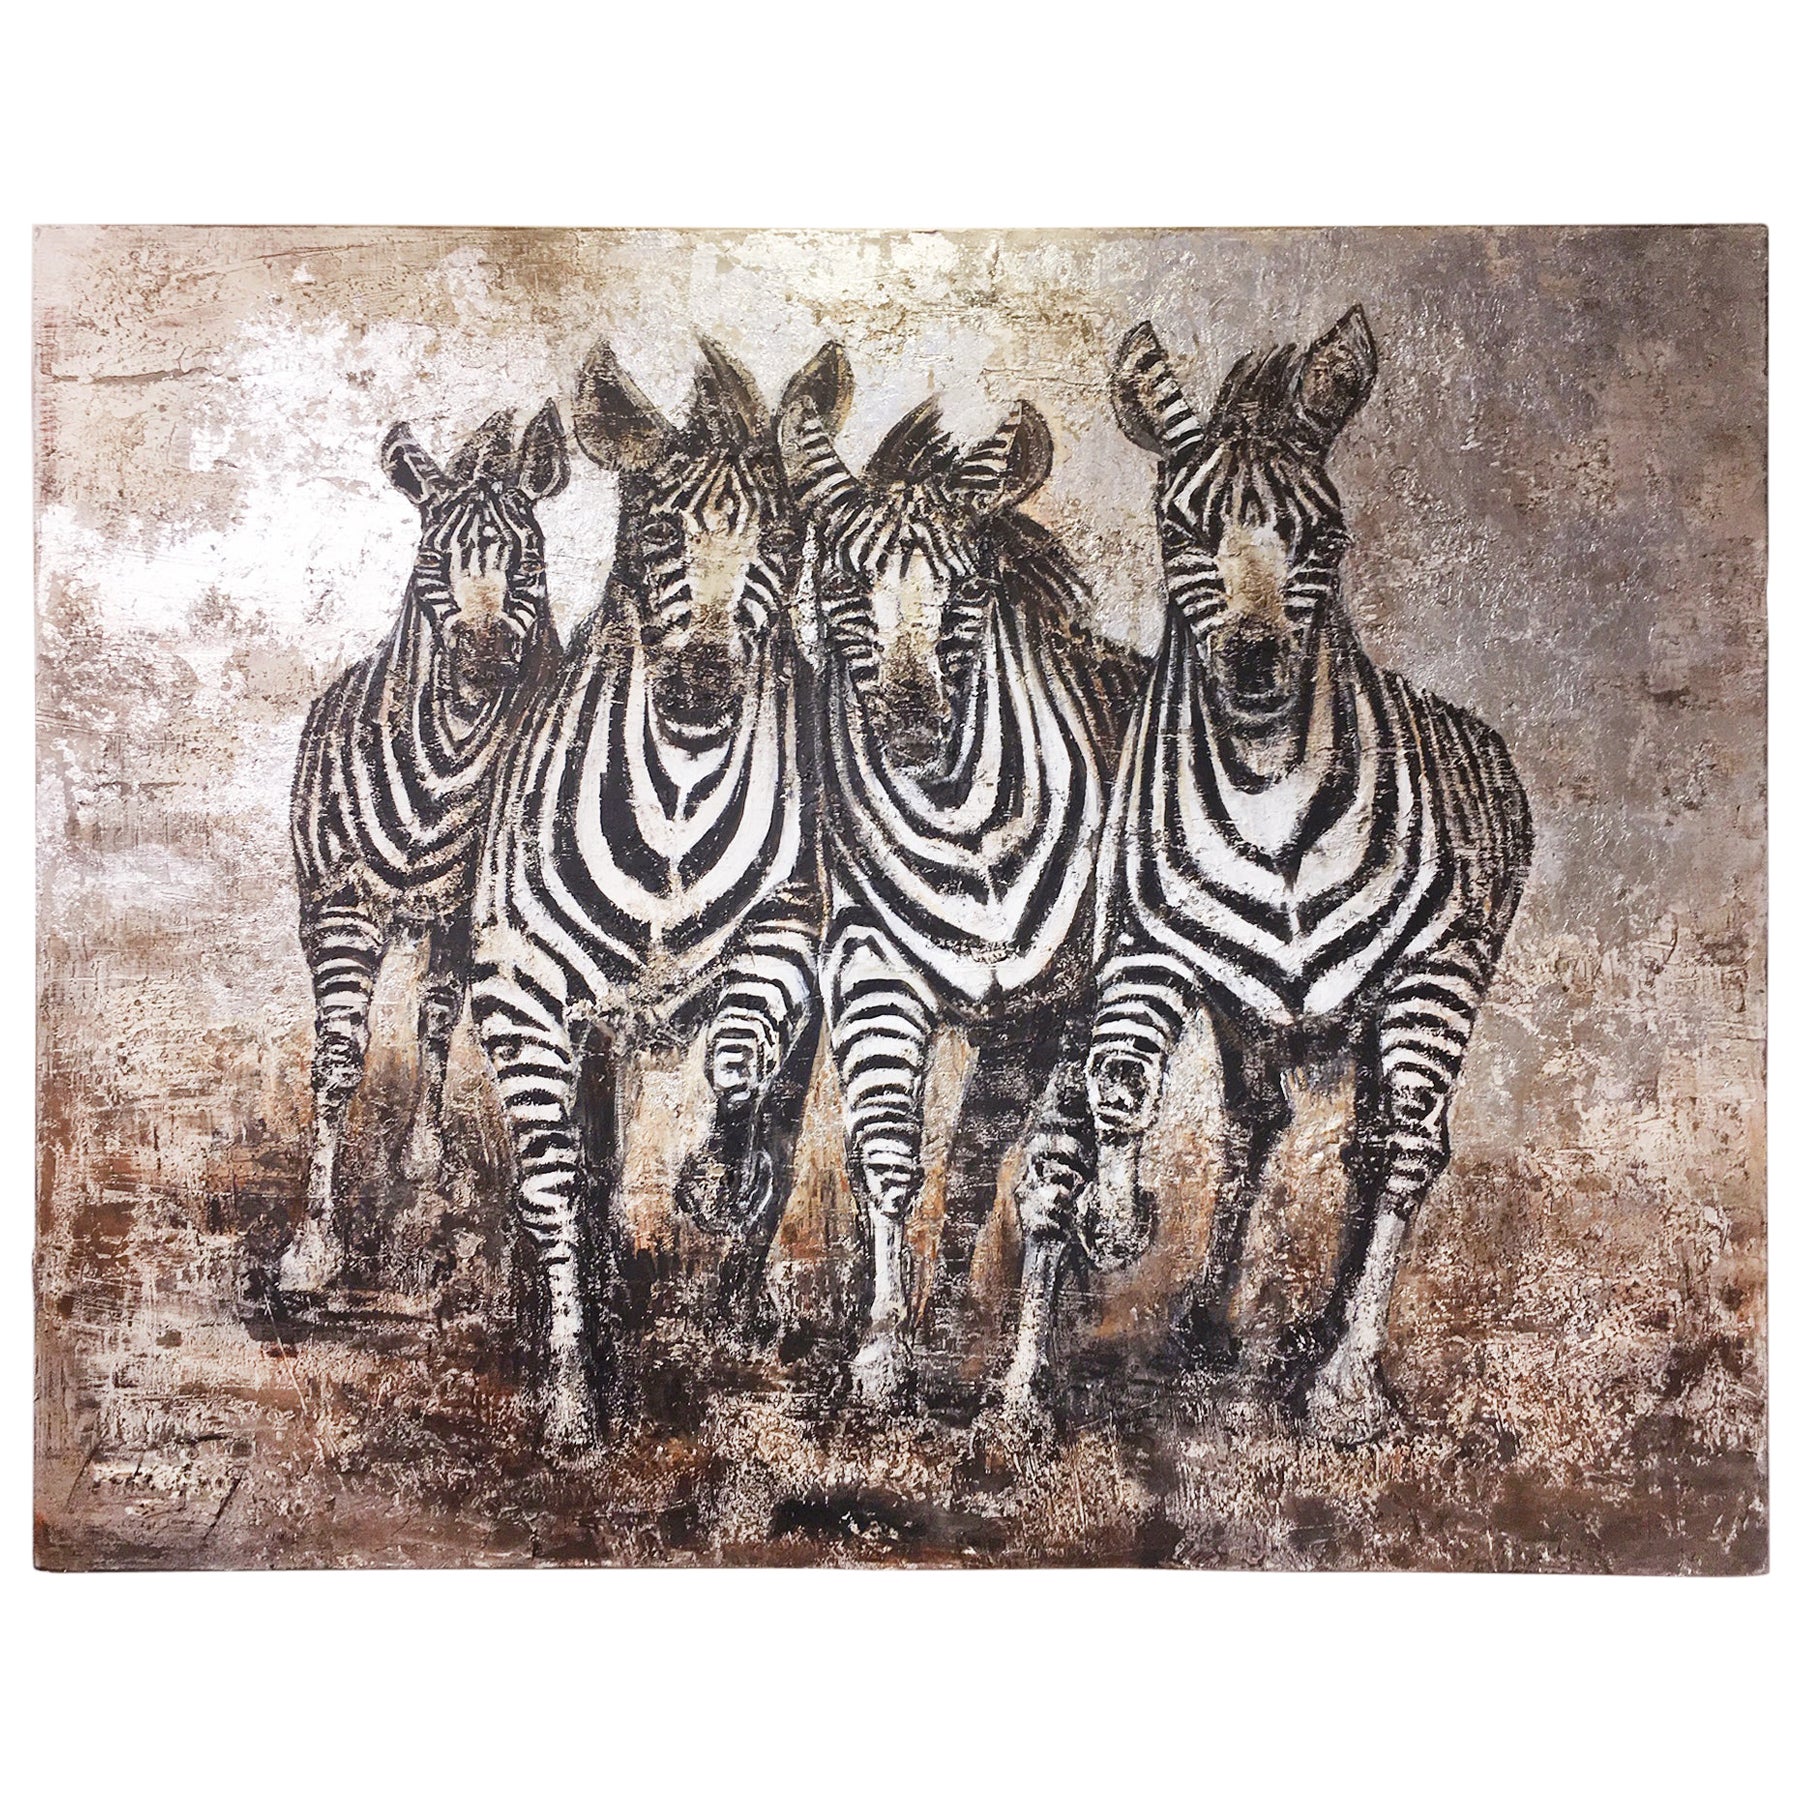 Zebras Painting For Sale